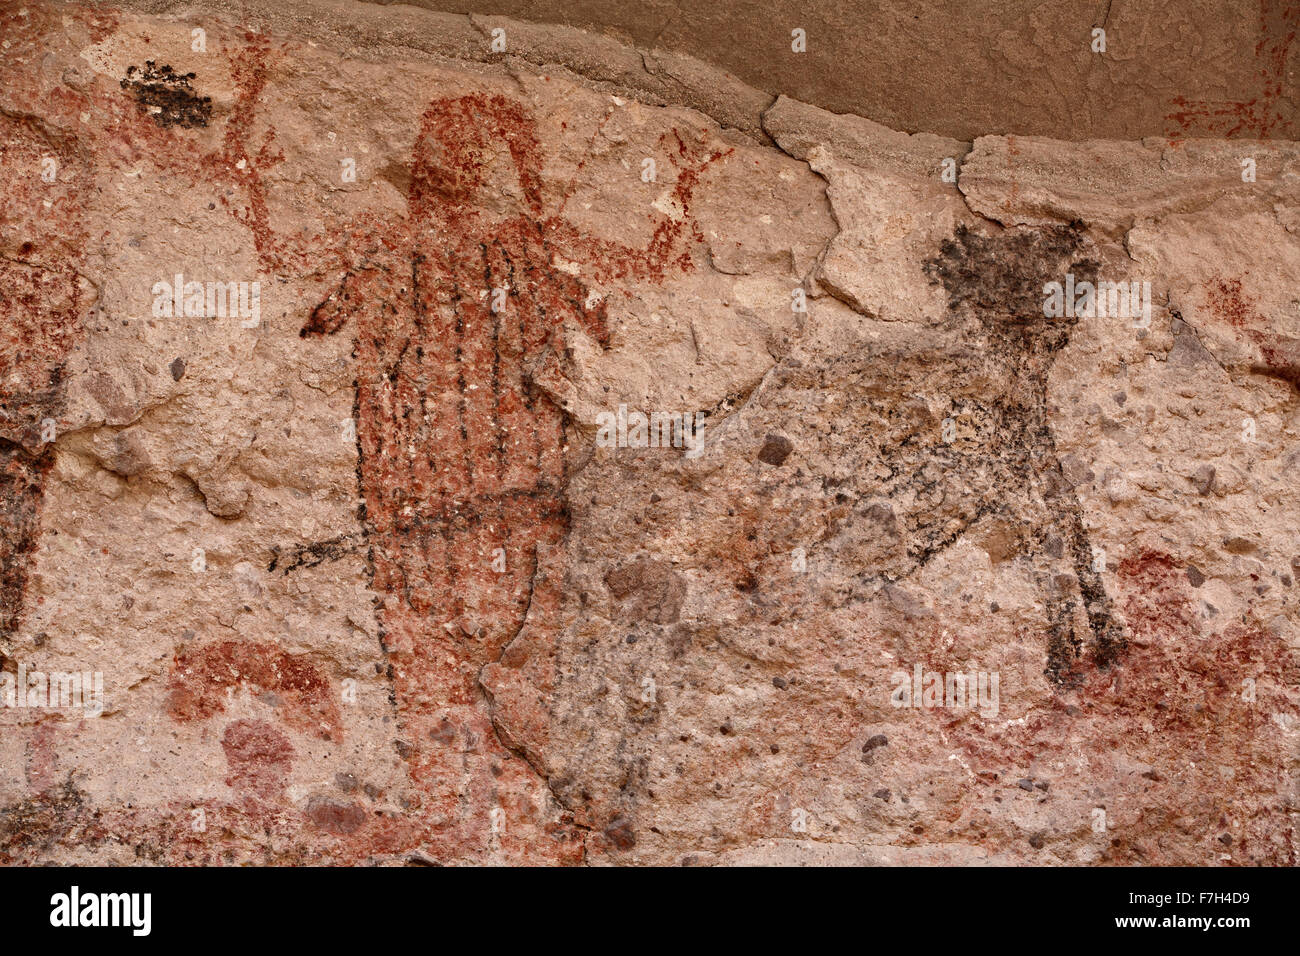 pr5428-D. petroglyphs and rock paintings of Santa Marta, which depict people, animals (deer, rabbits, fish, more). Baja, Mexico. Stock Photo